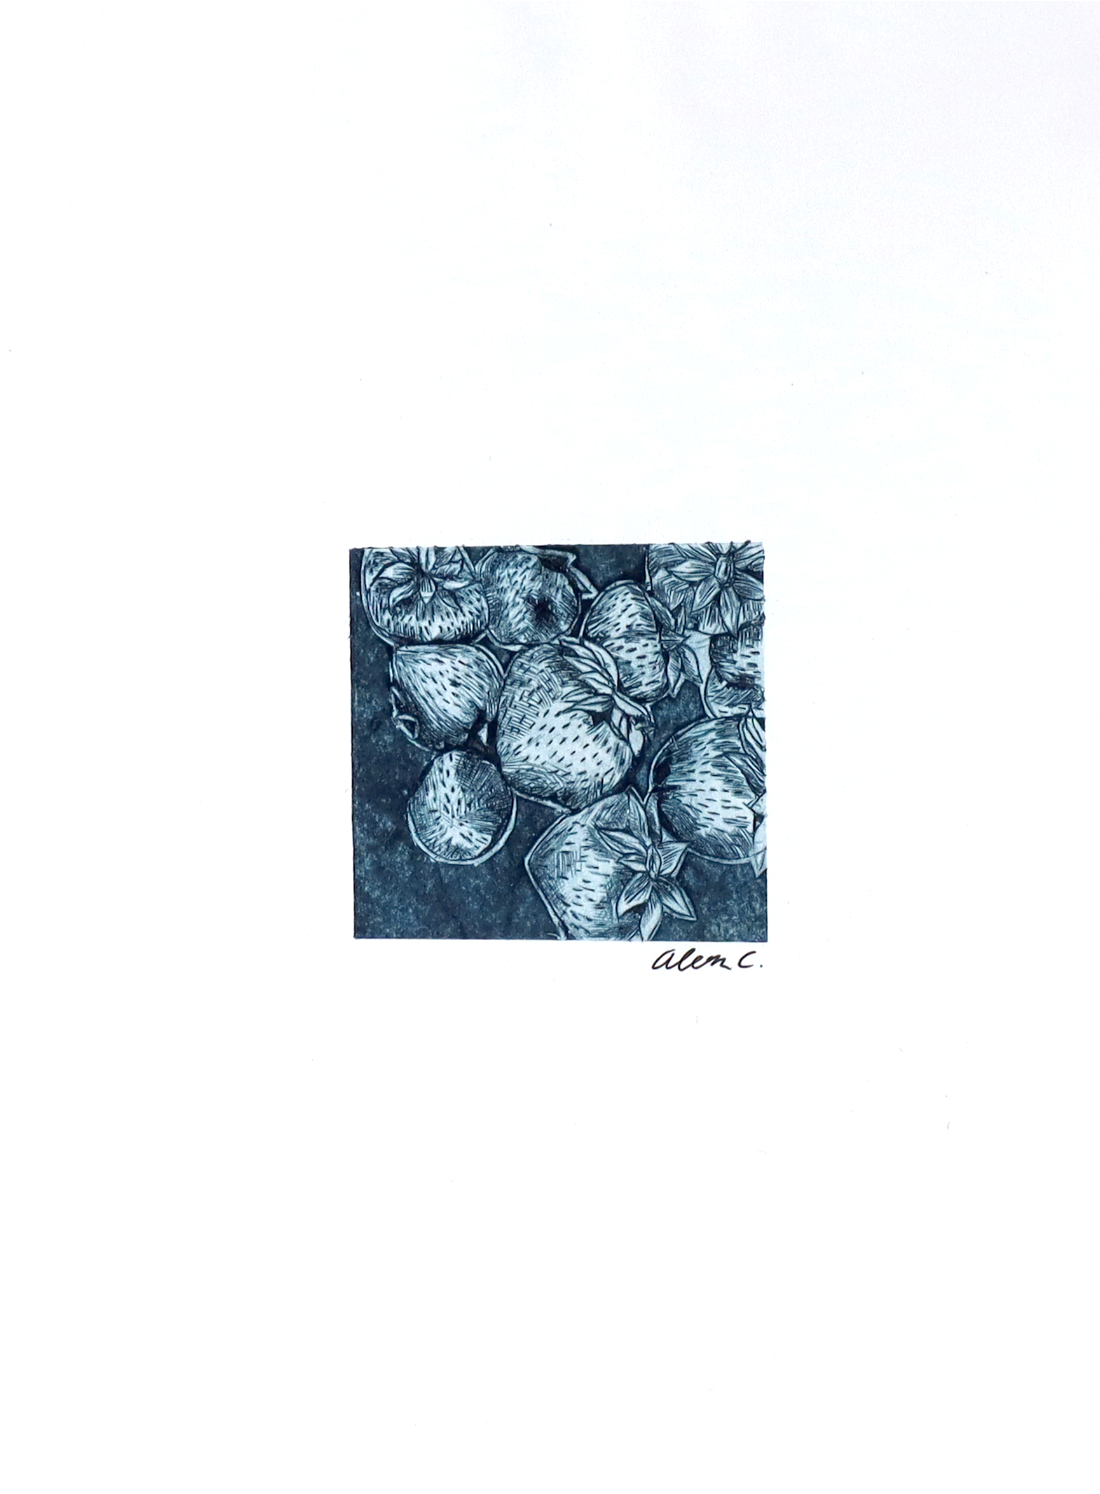 etching of strawberries